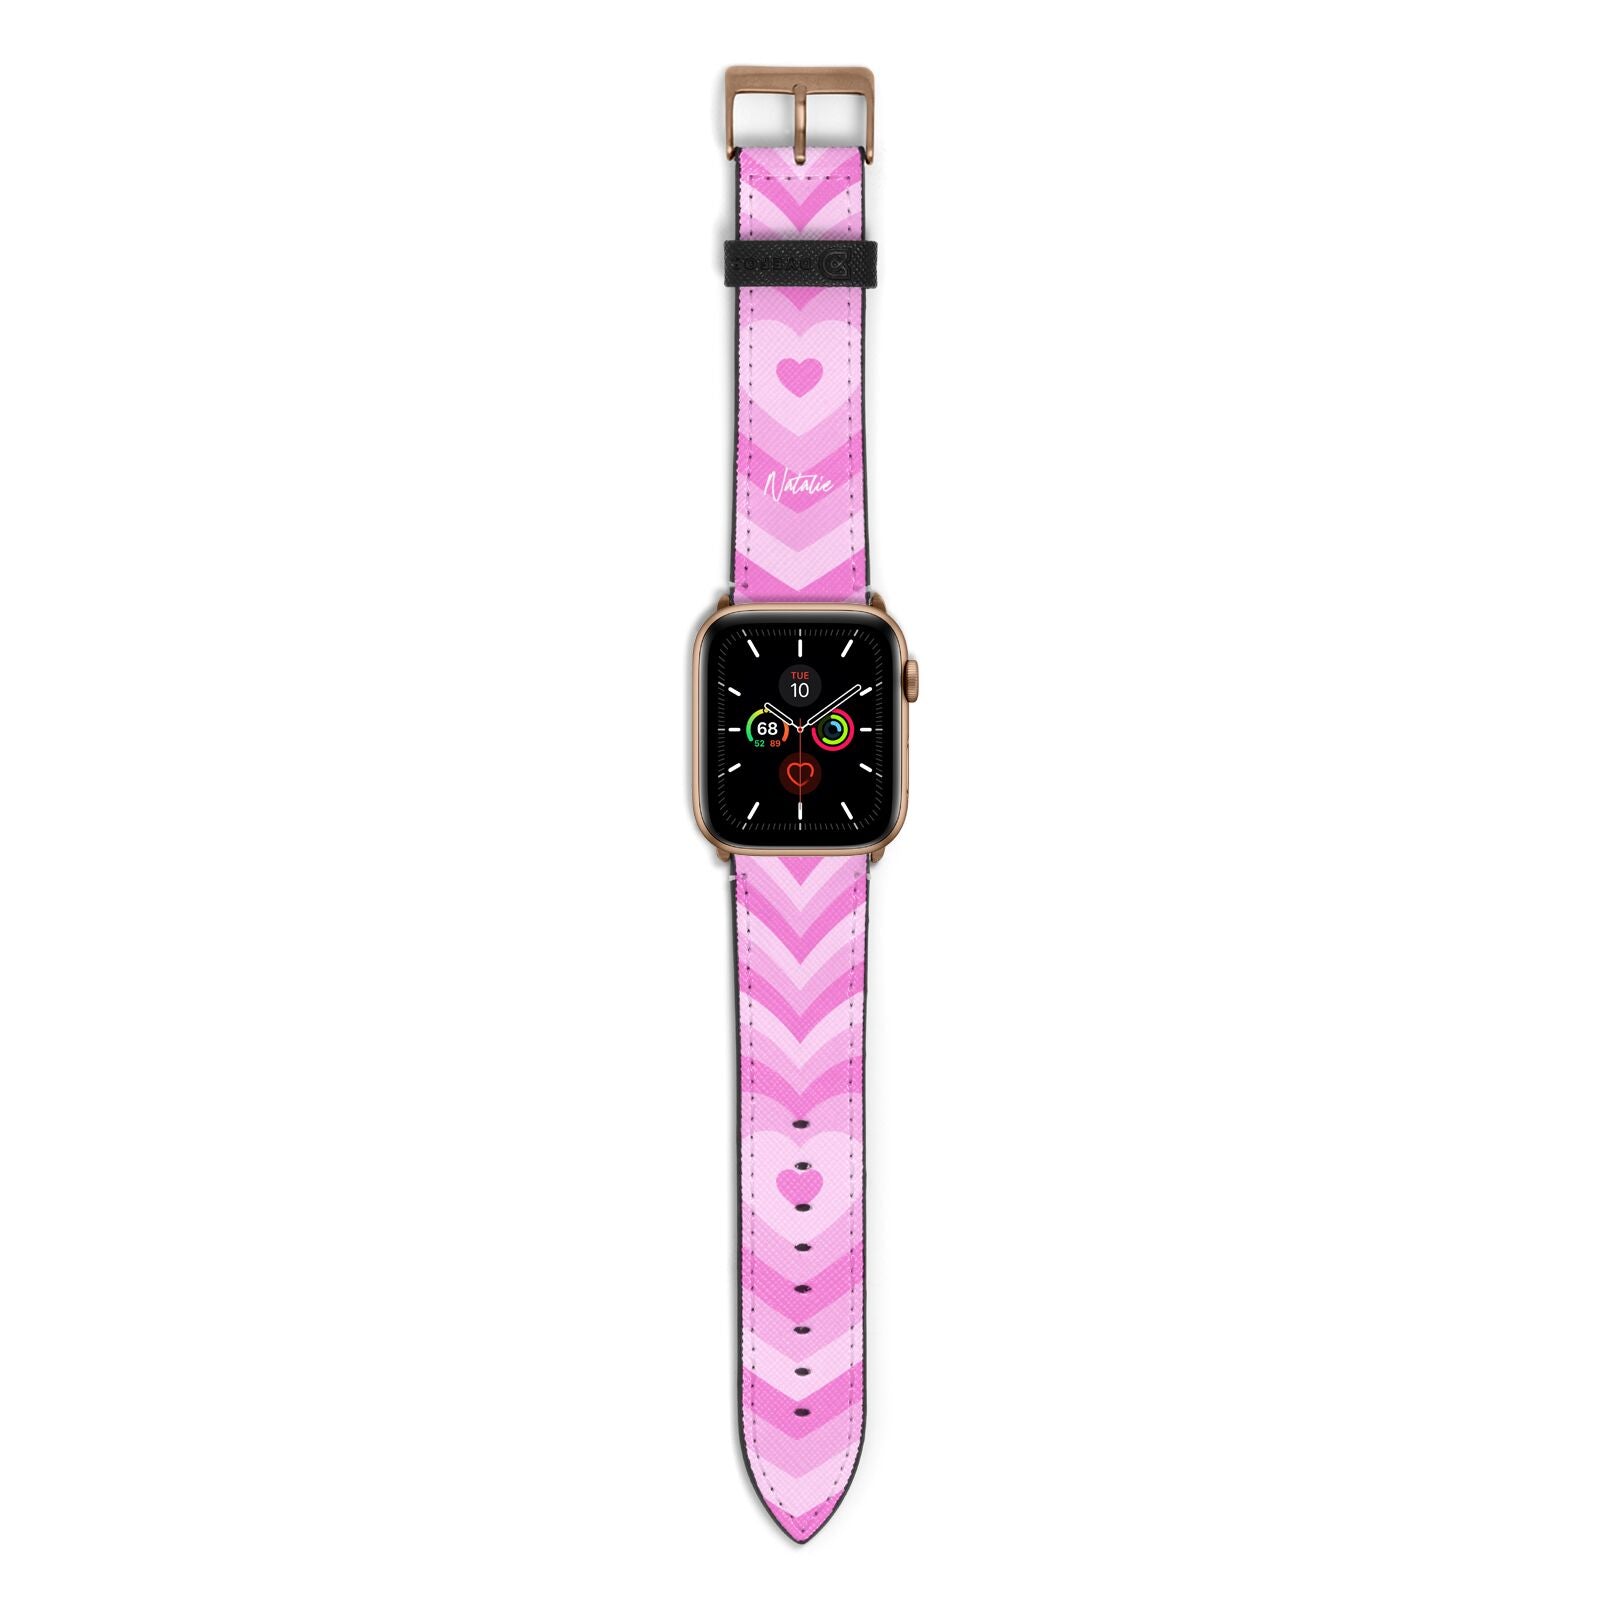 Personalised Pink Heart Apple Watch Strap with Gold Hardware